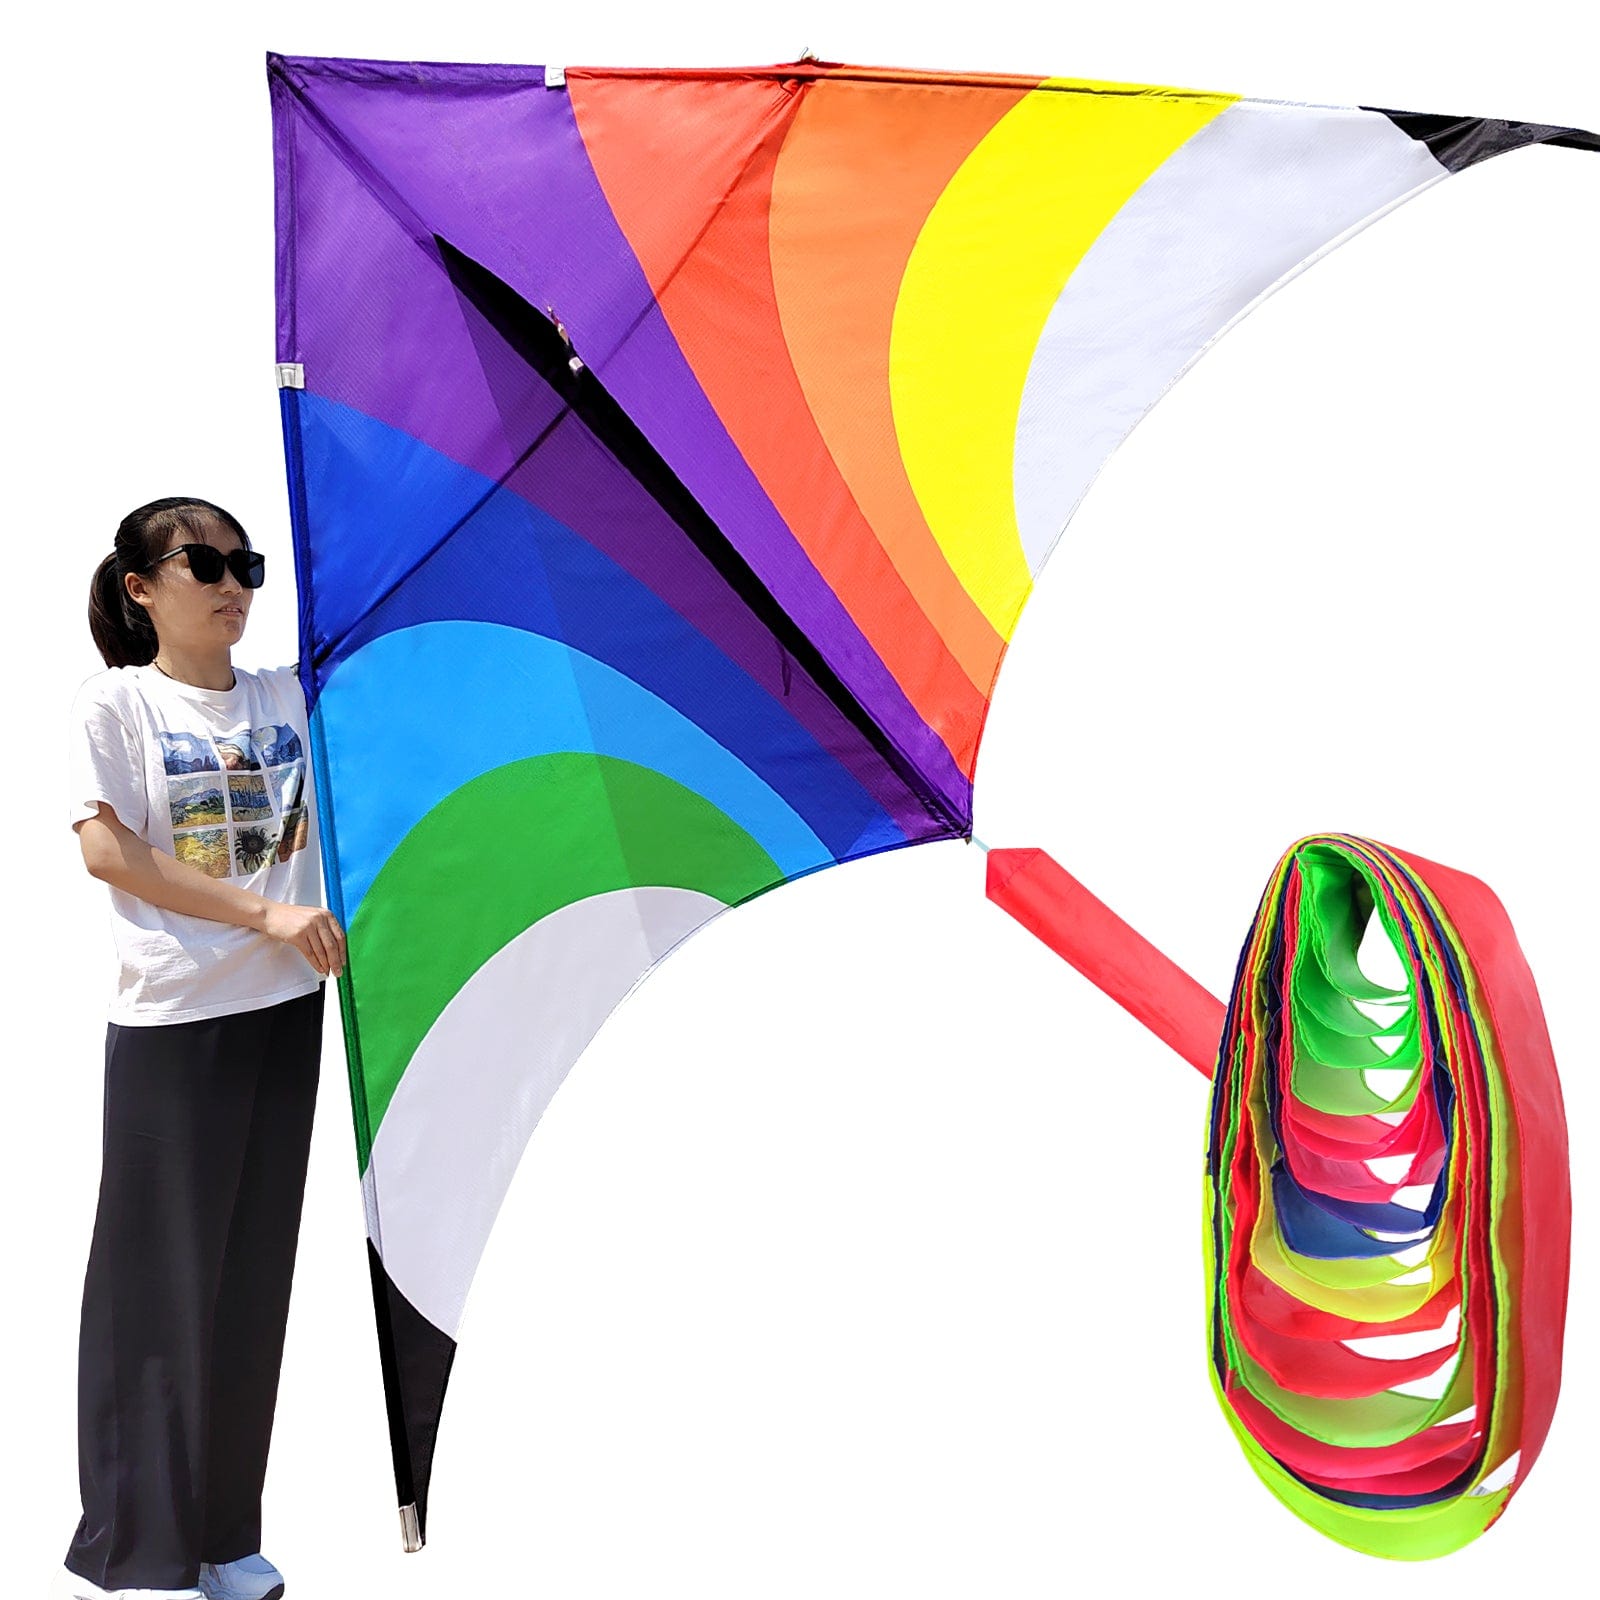 [2 Pack] Extra Large Wide Colorful Kite Rainbow Vivid Colors 60” Wings, Long Tail 95”, Easy to Assemble and Fly, Including Reel and Bag, for Beach